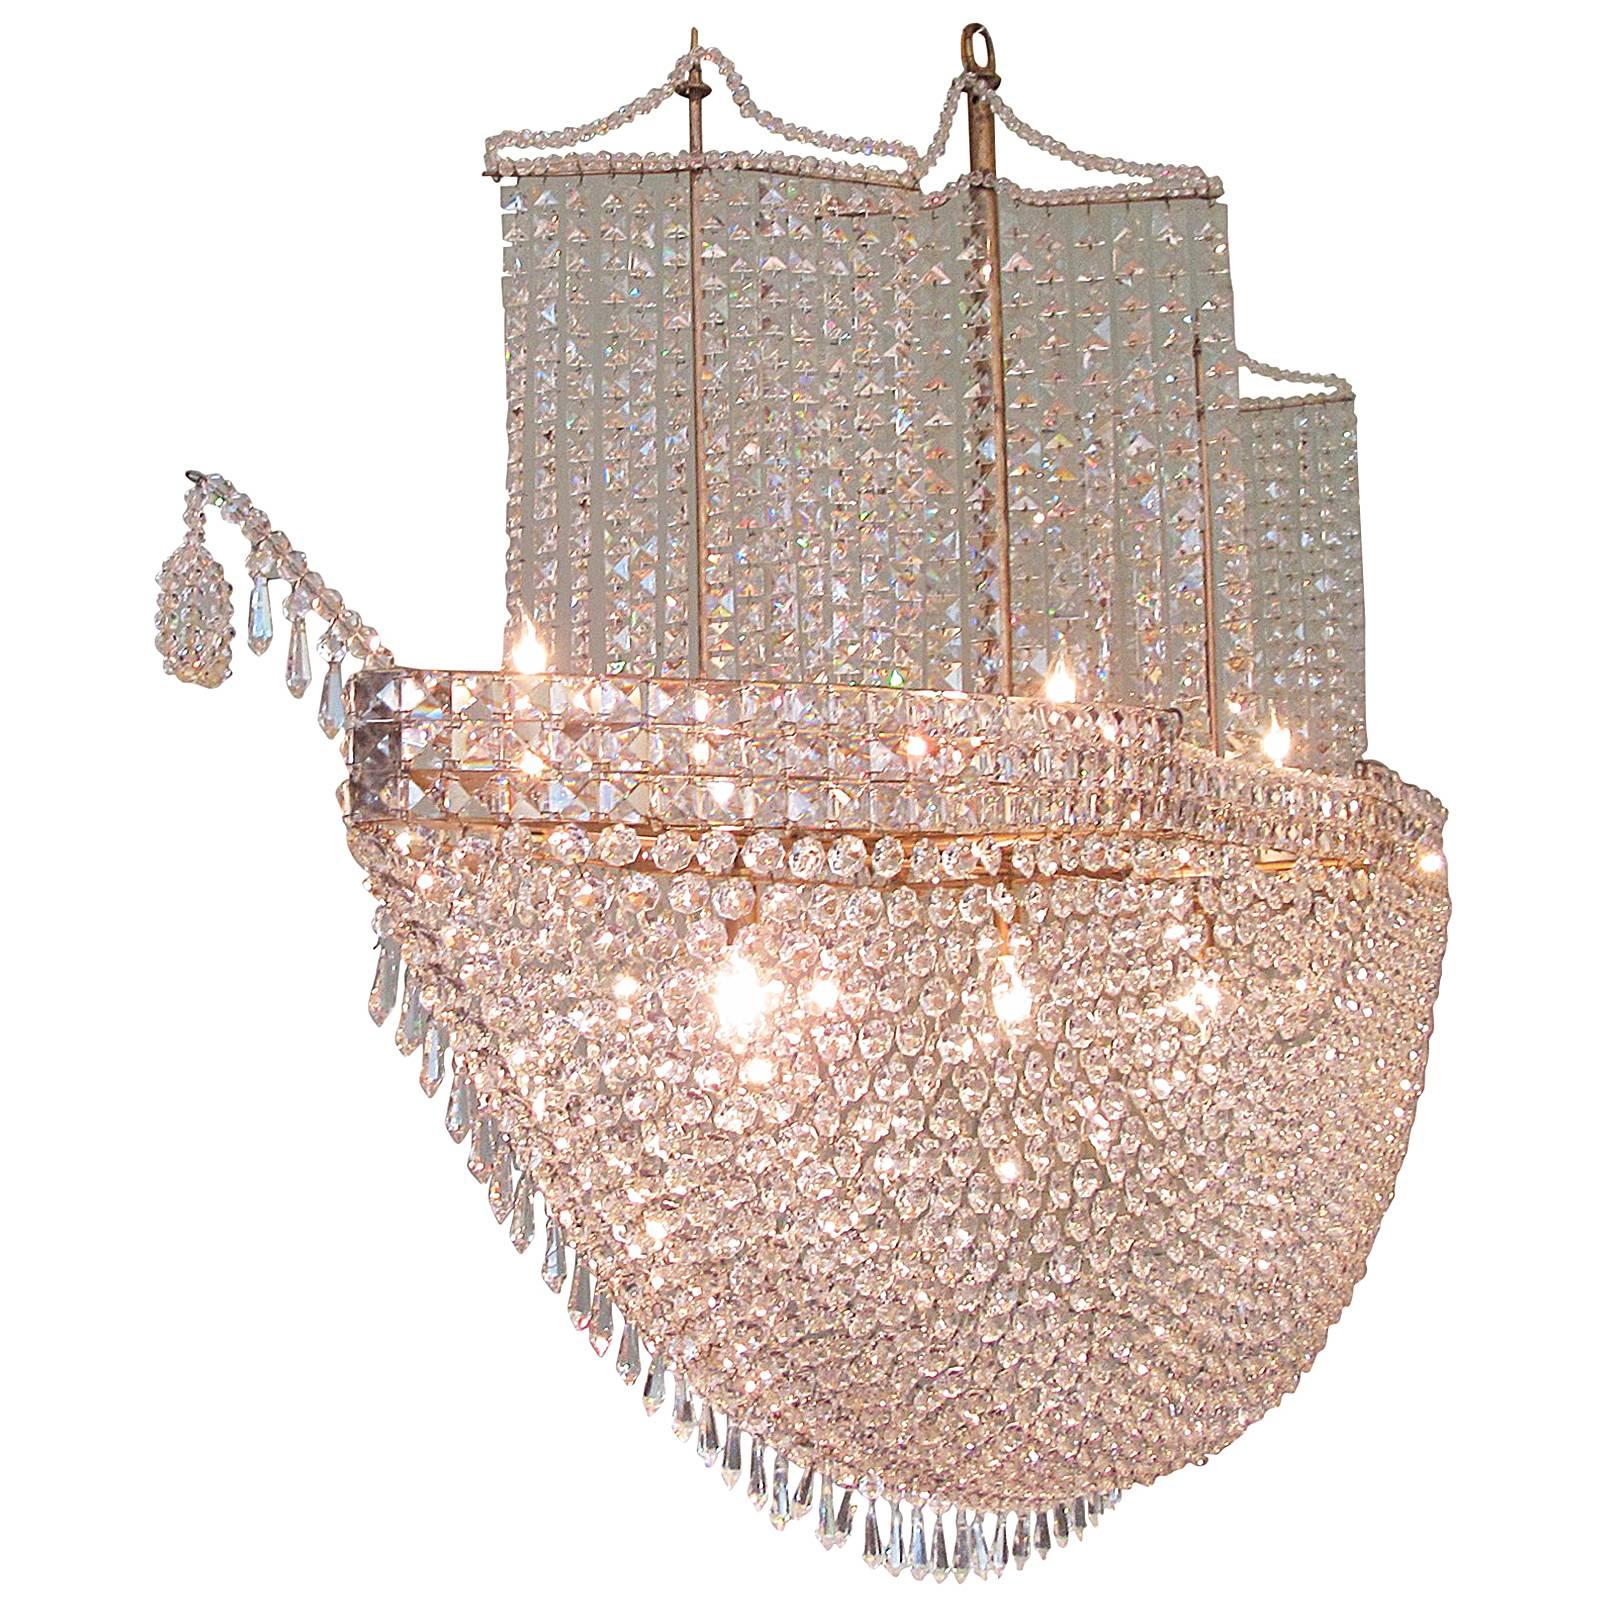 Monumental Mid-20th Century French Crystal and Tole Three Masted Ship Chandelier